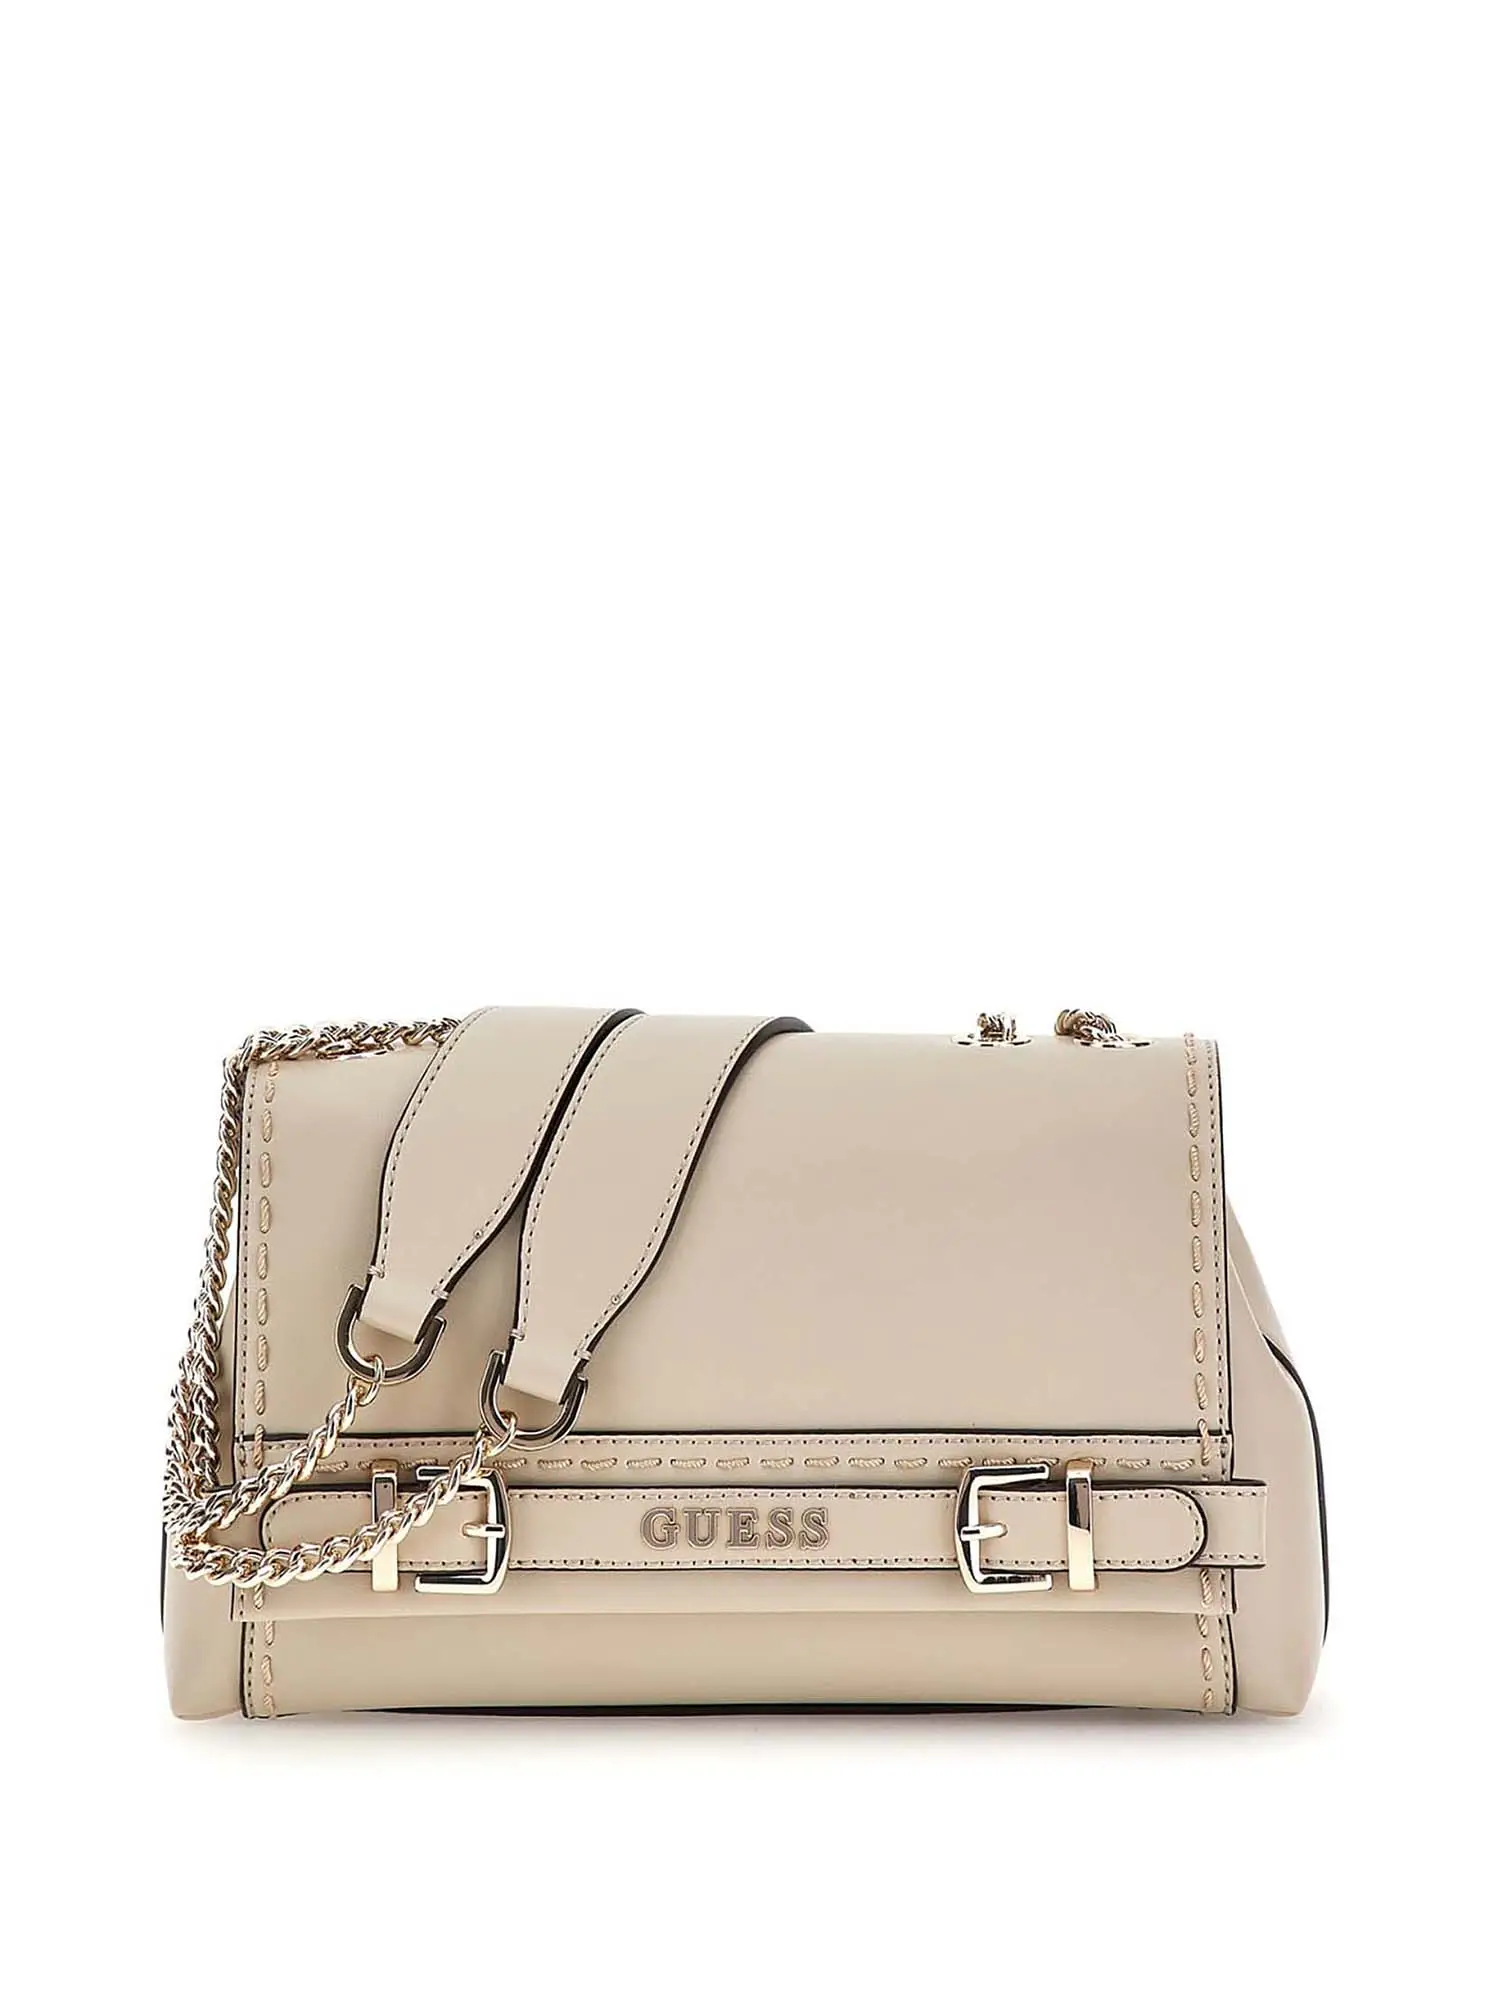 TRACOLLA DONNA - GUESS - HWVC89 85210 - TAUPE, UNICA